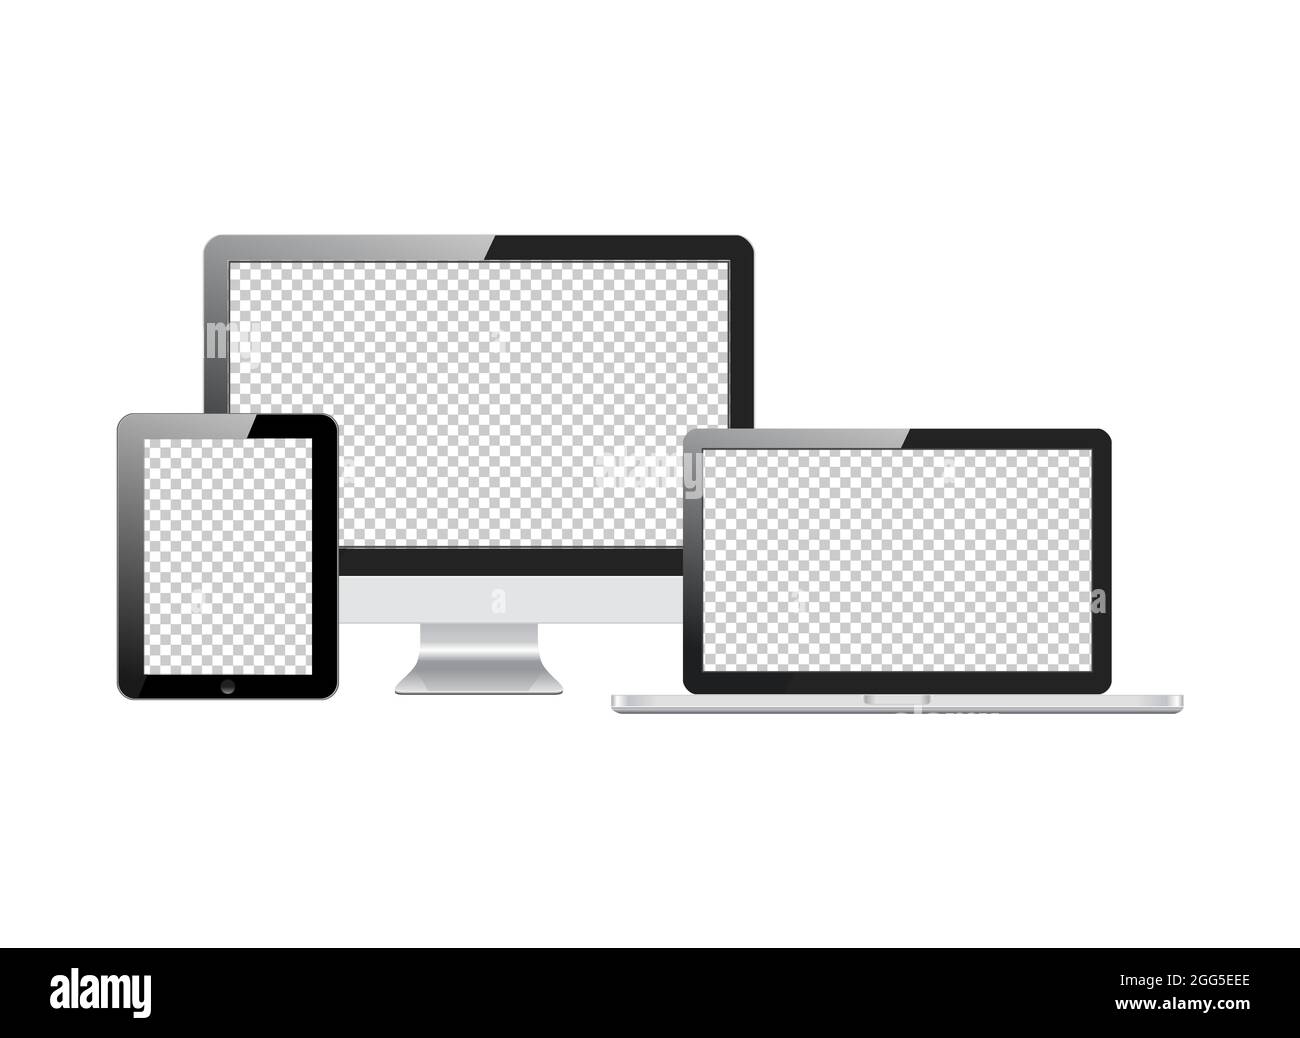 Set of realistic screen transparent computer monitors, laptops, tablets. Electronic gadgets isolated on white background Stock Vector